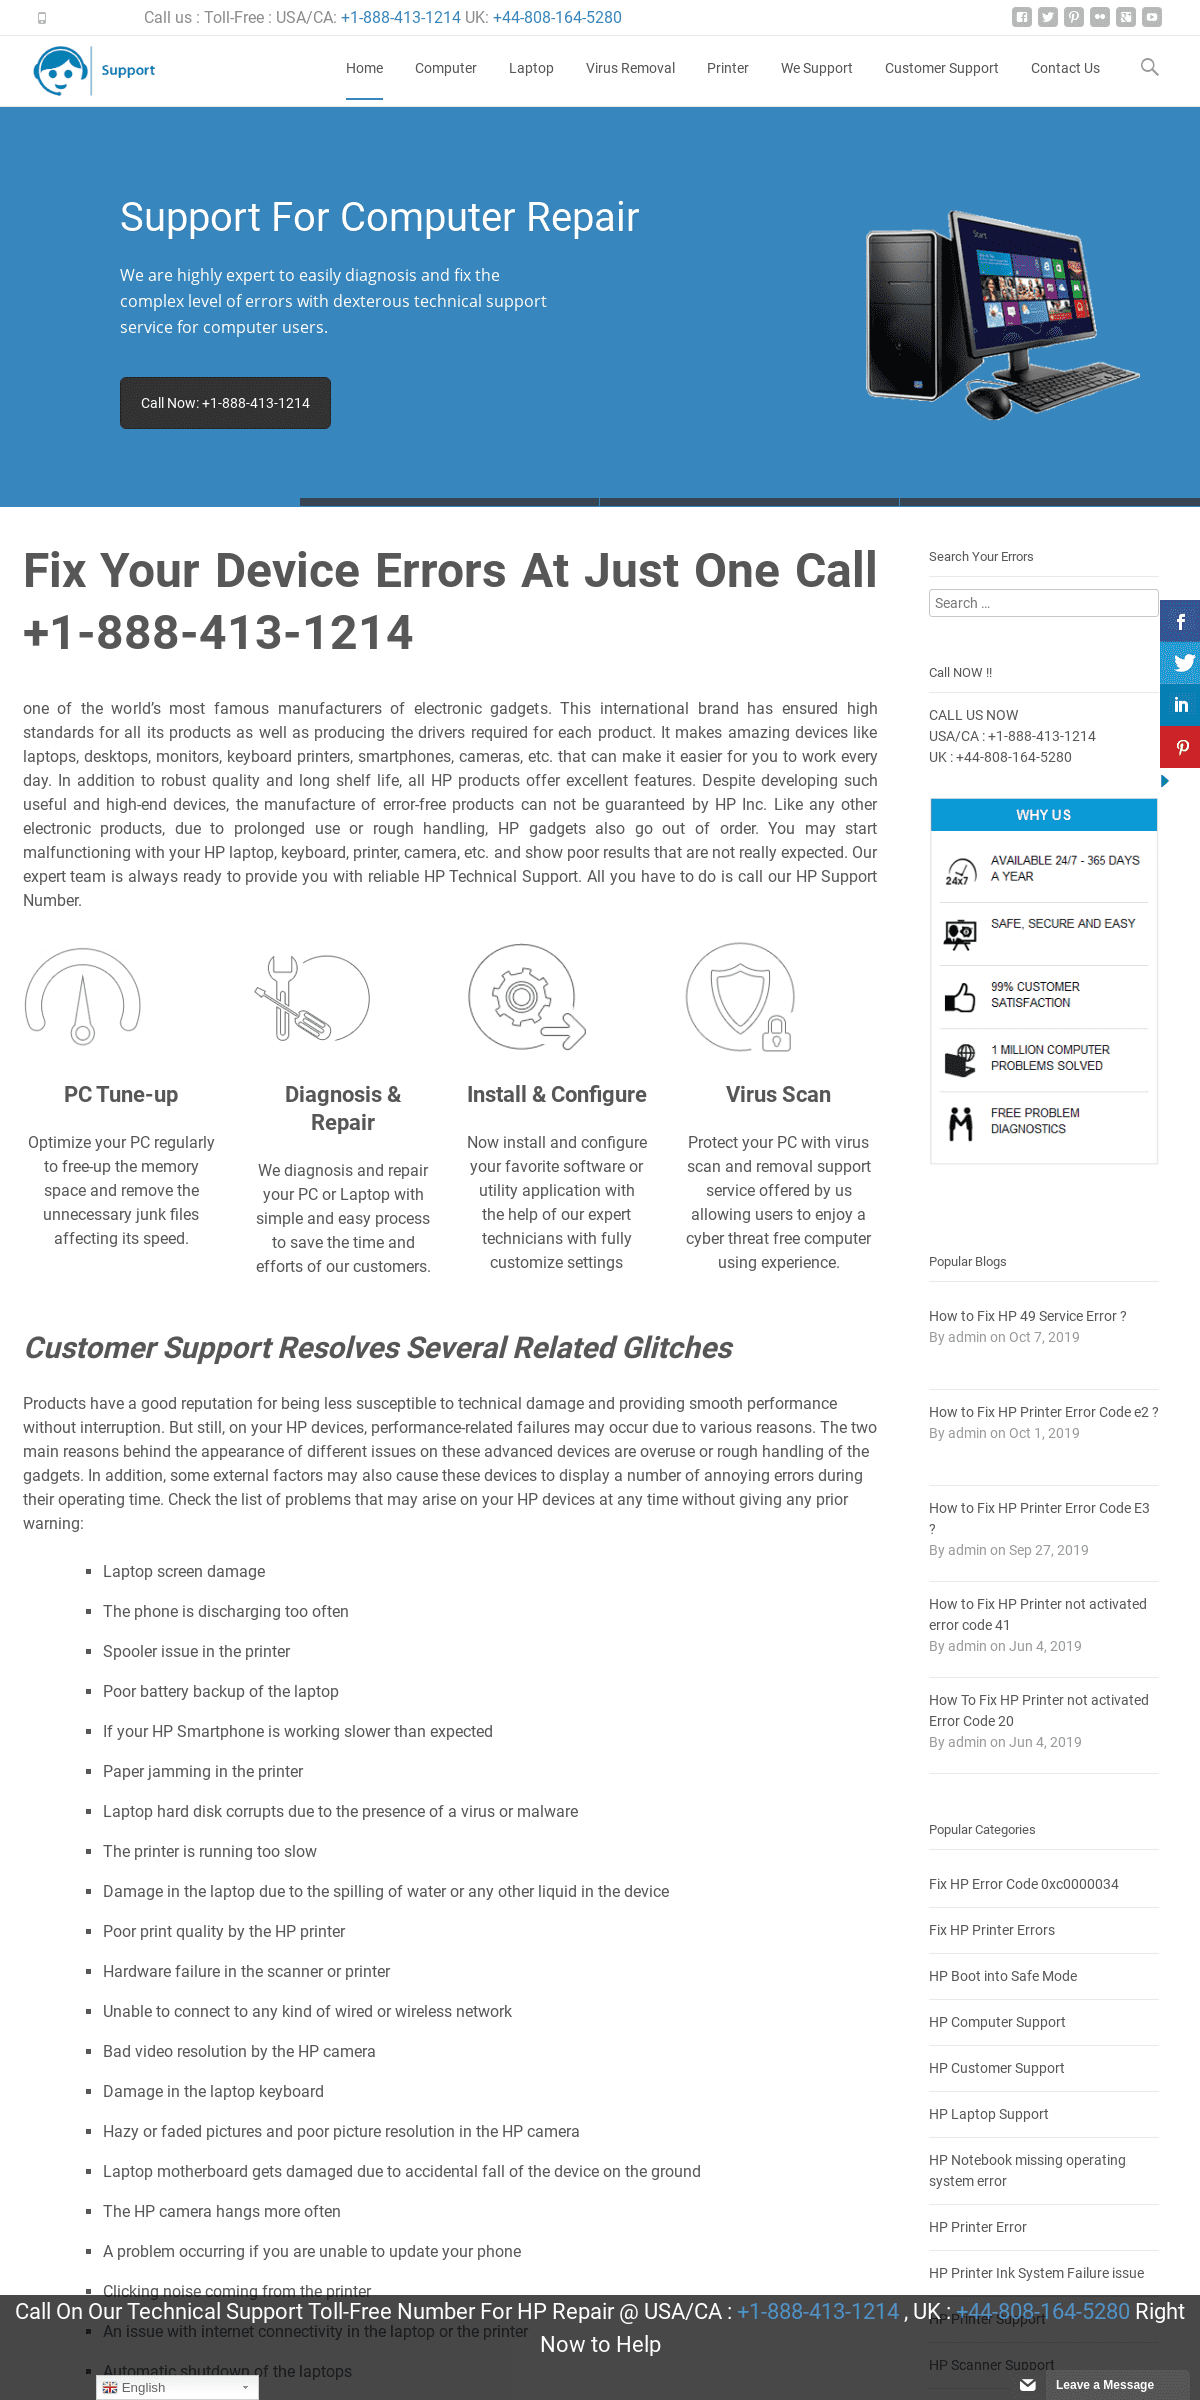 A complete backup of hpsupportphonenumbers.com